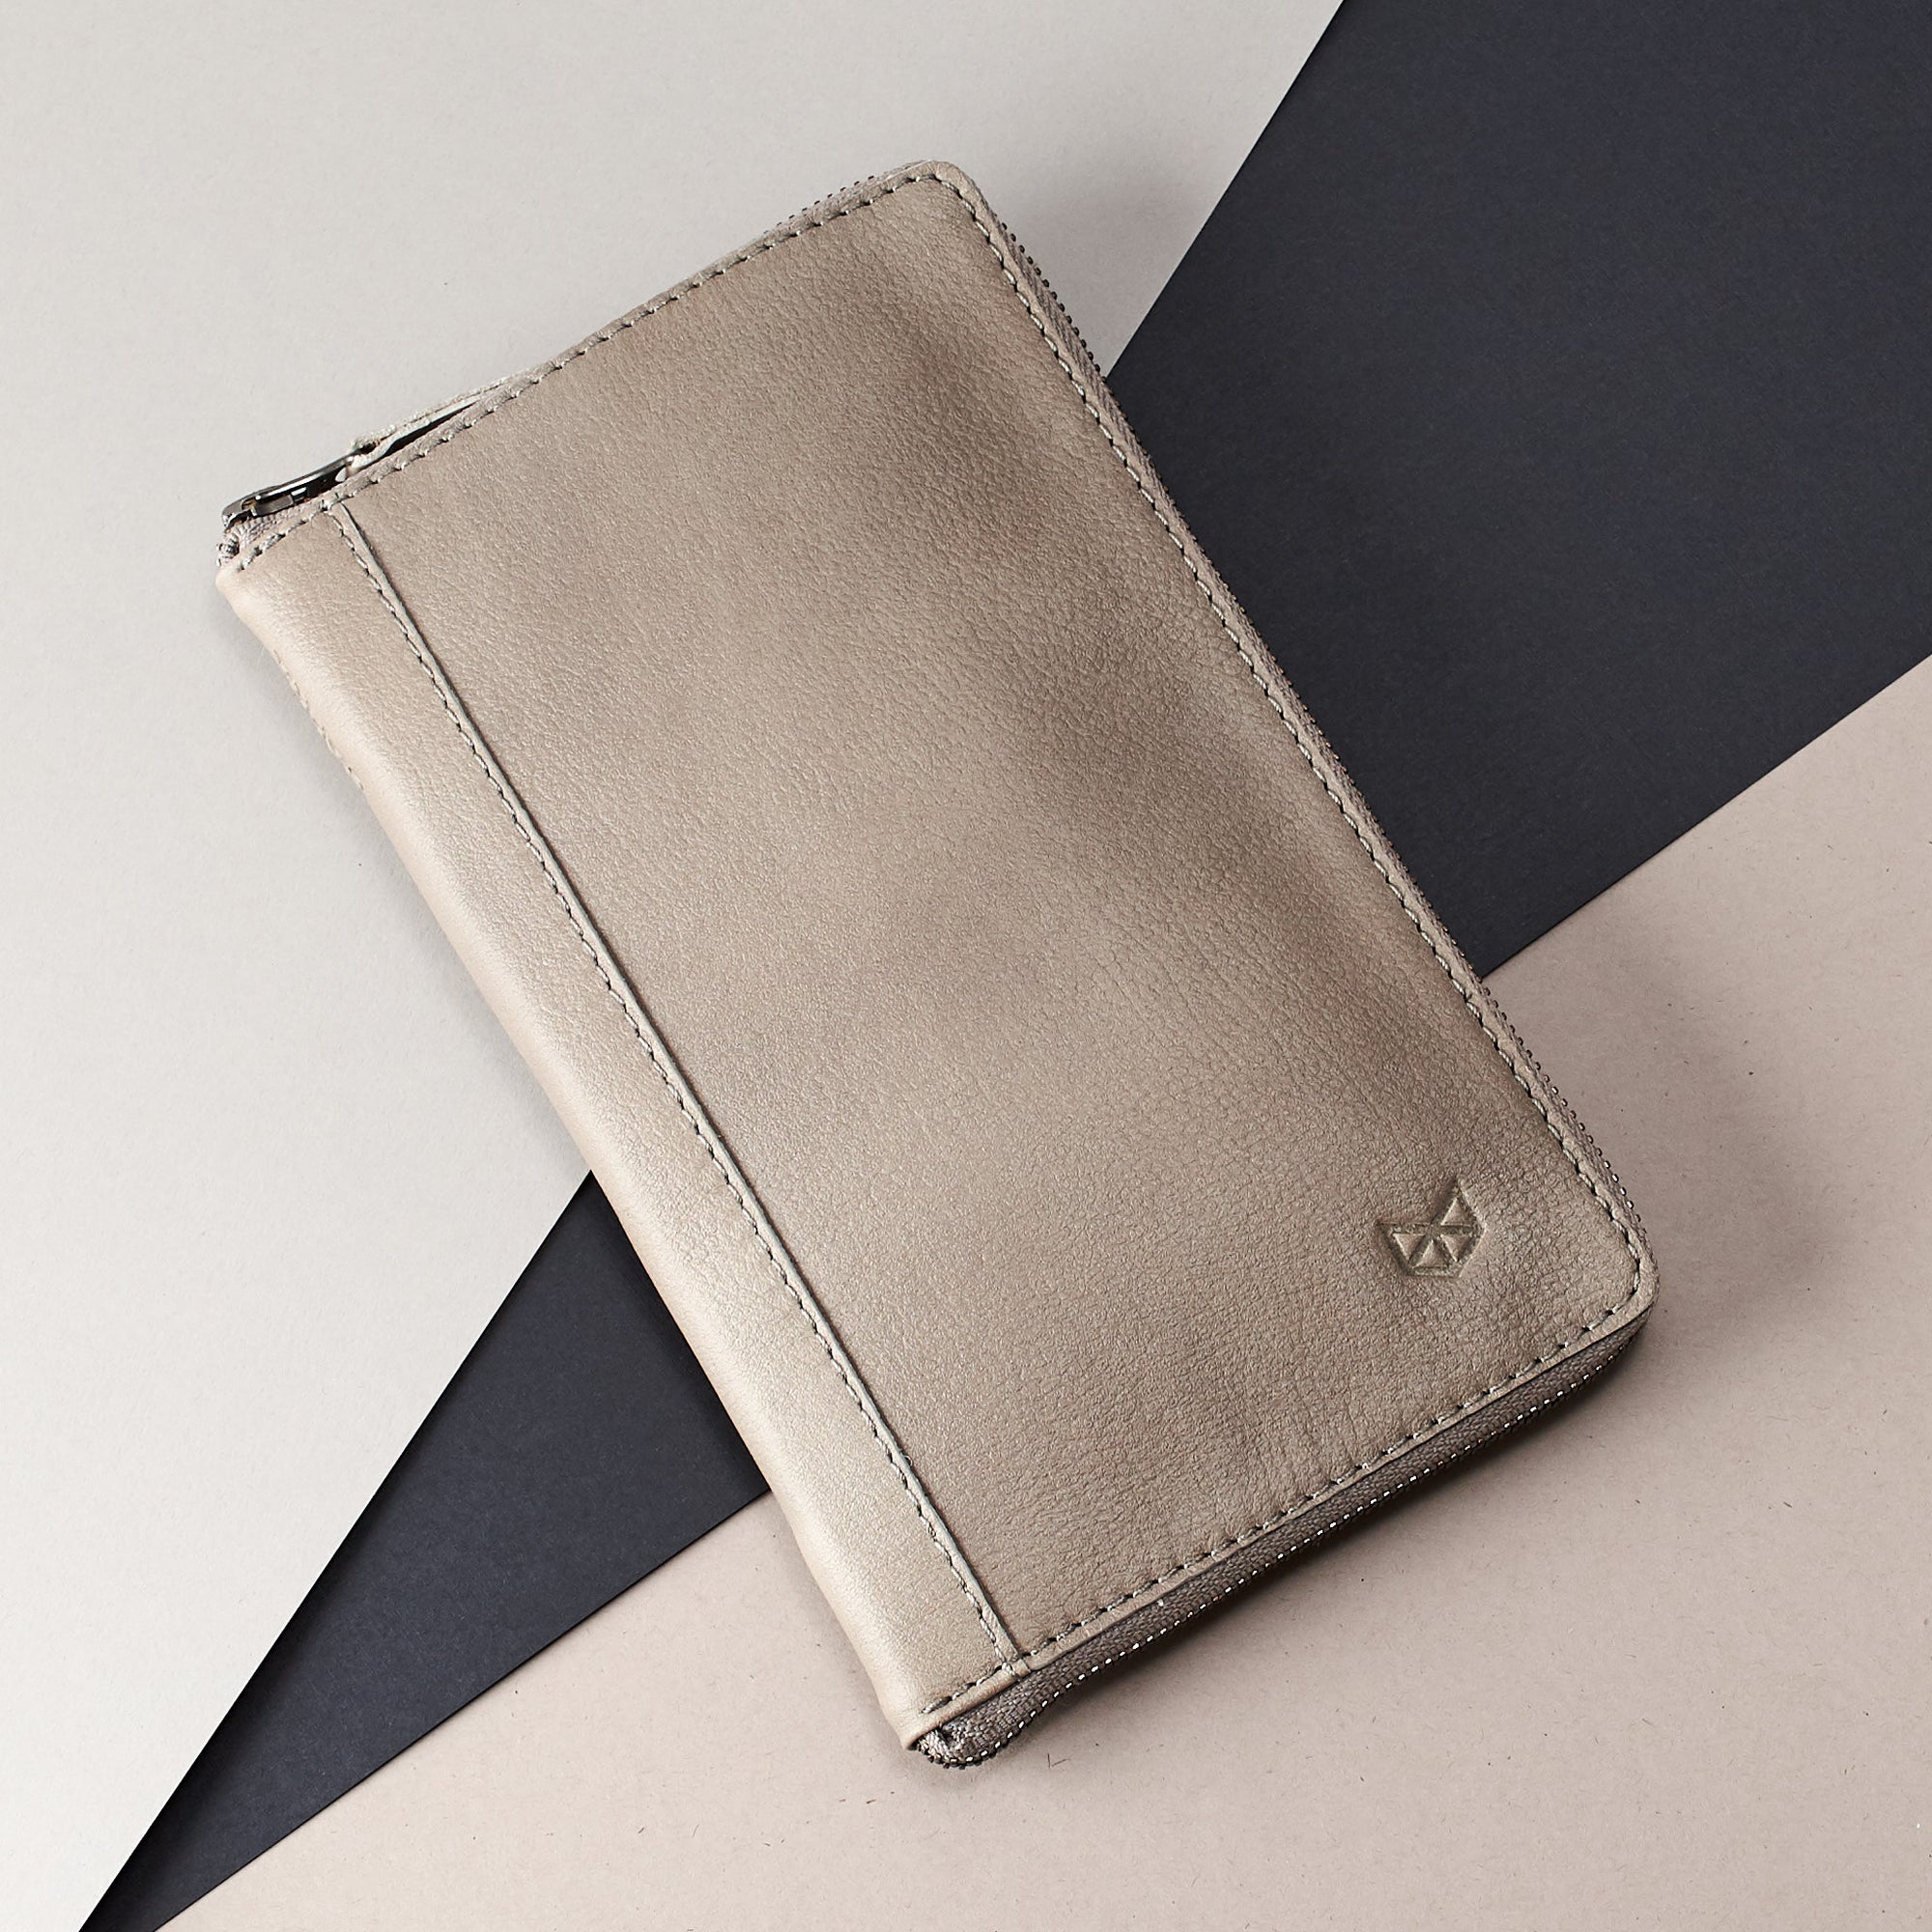 Grey leather passport wallet. Perfect for travelers. Gift for men by Capra Leather.